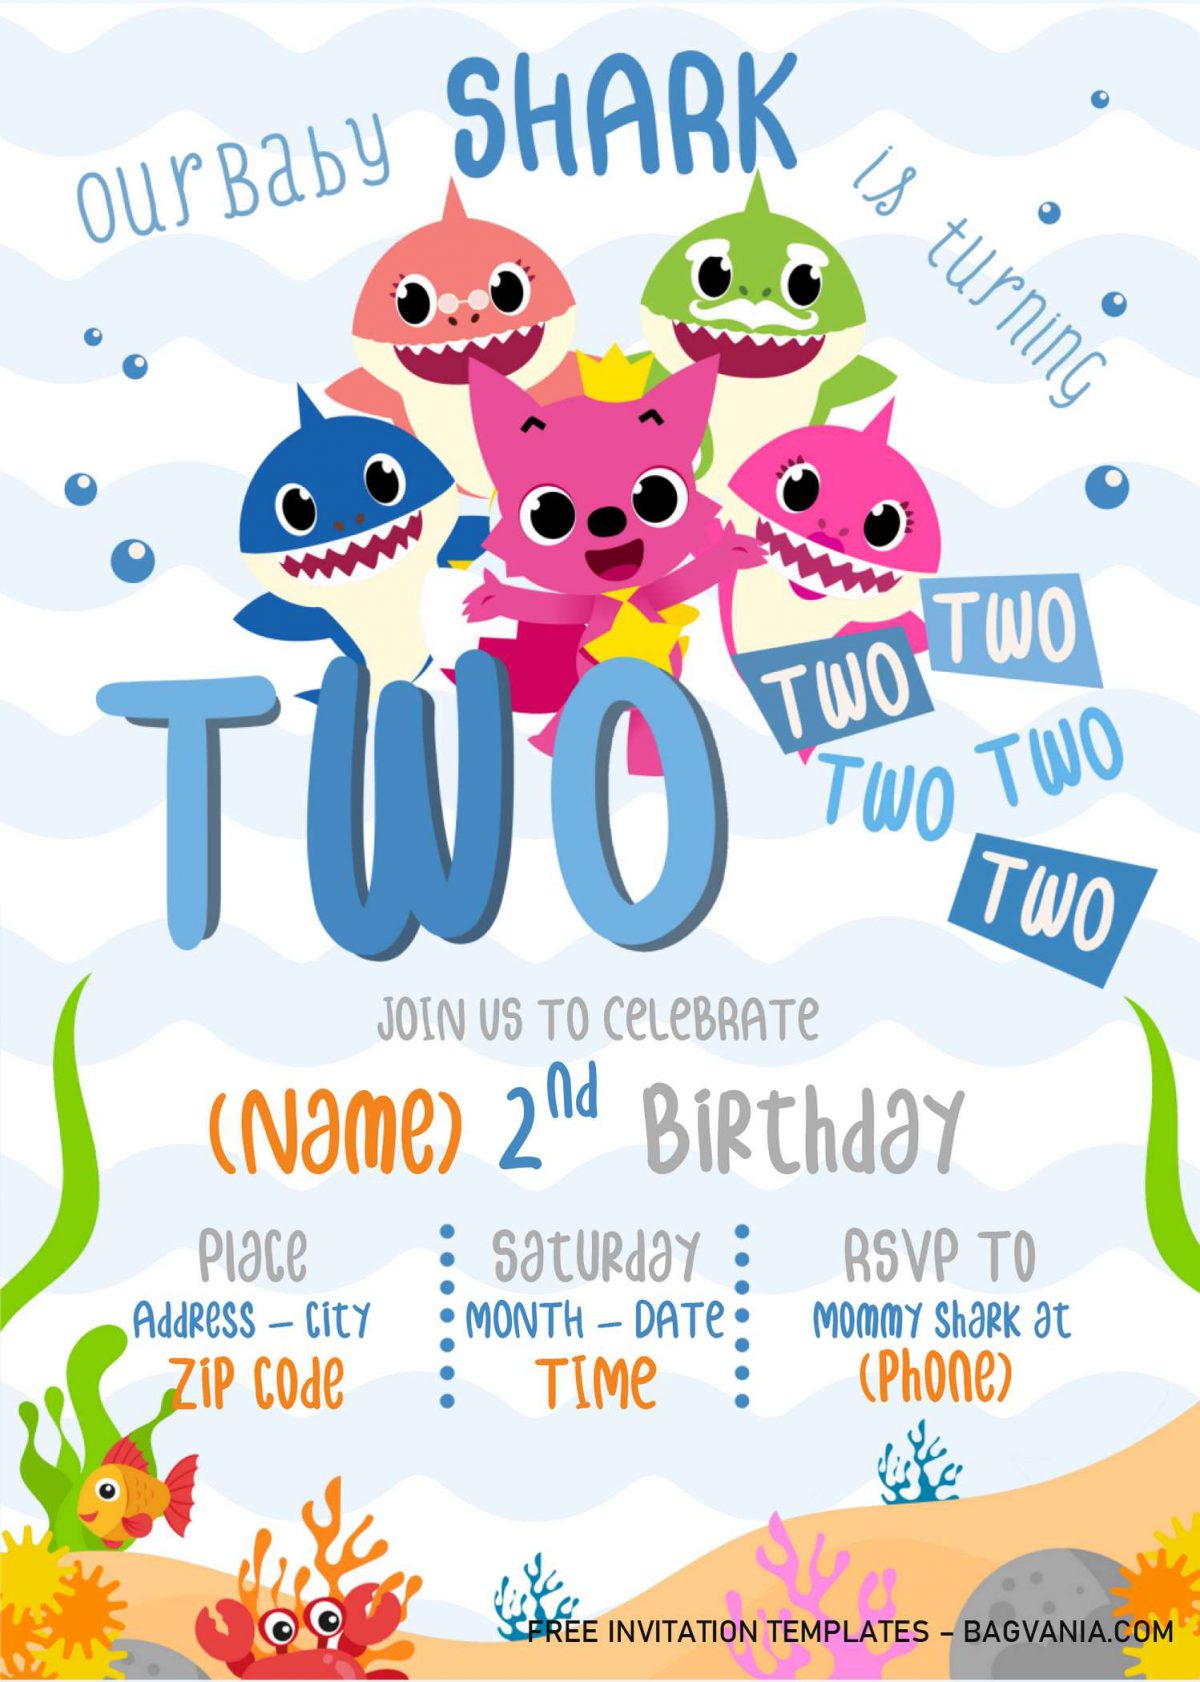 Baby Shark Birthday Invitation Templates - Editable With Microsoft Word and has blue wave pattern